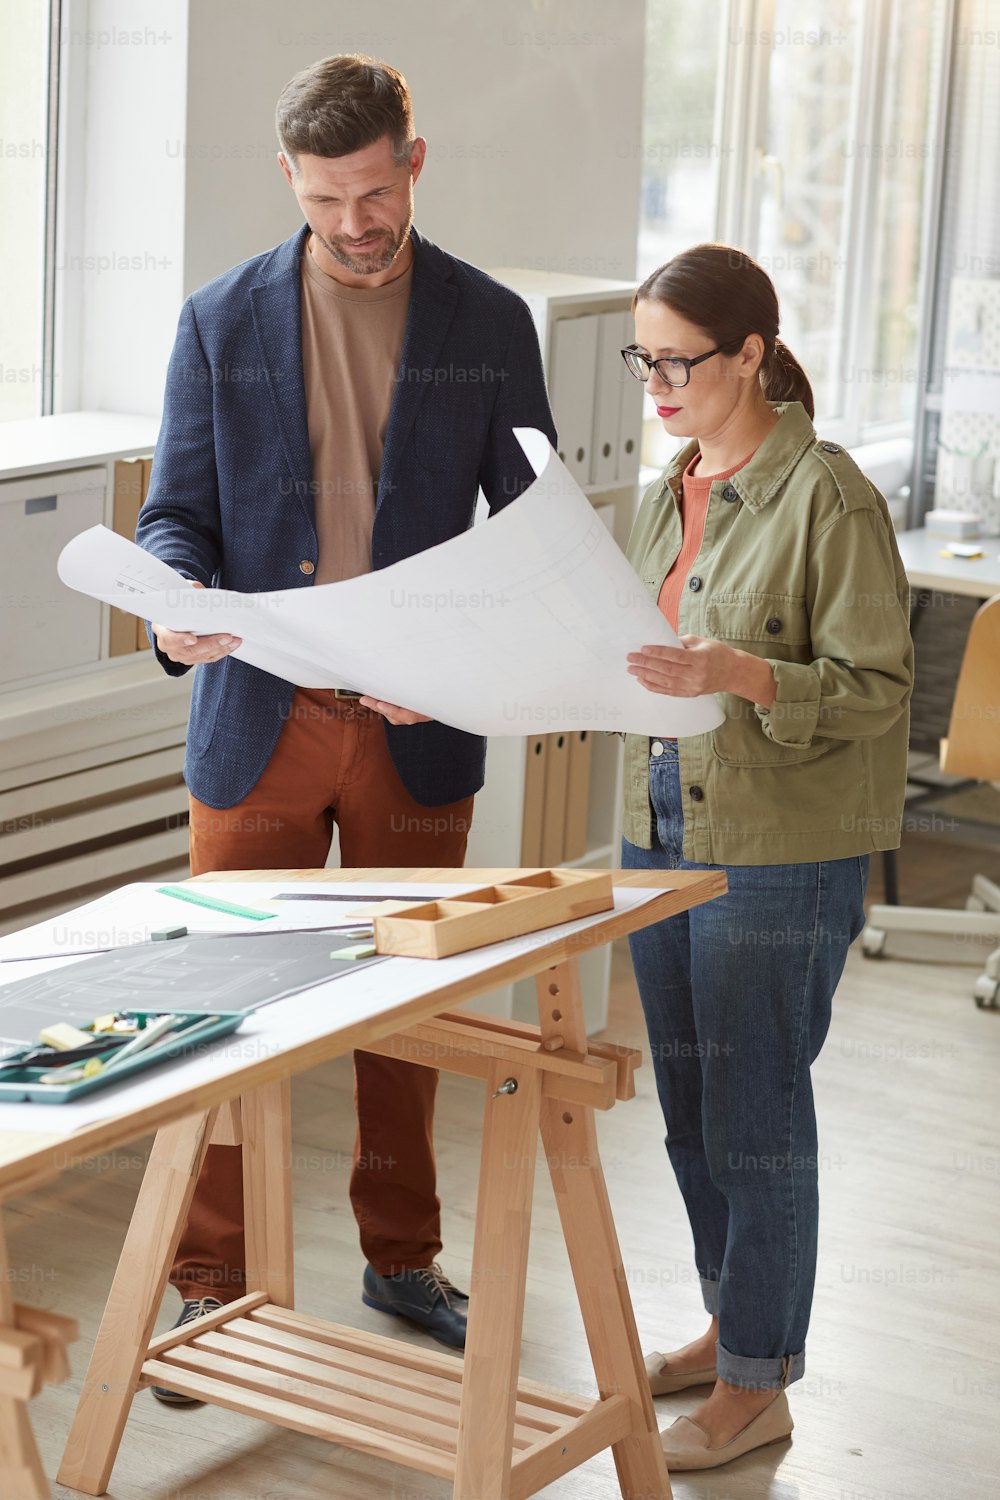 Vertical full length portrait of two architects holding blueprints and discussing work while standing by drawing desk in office